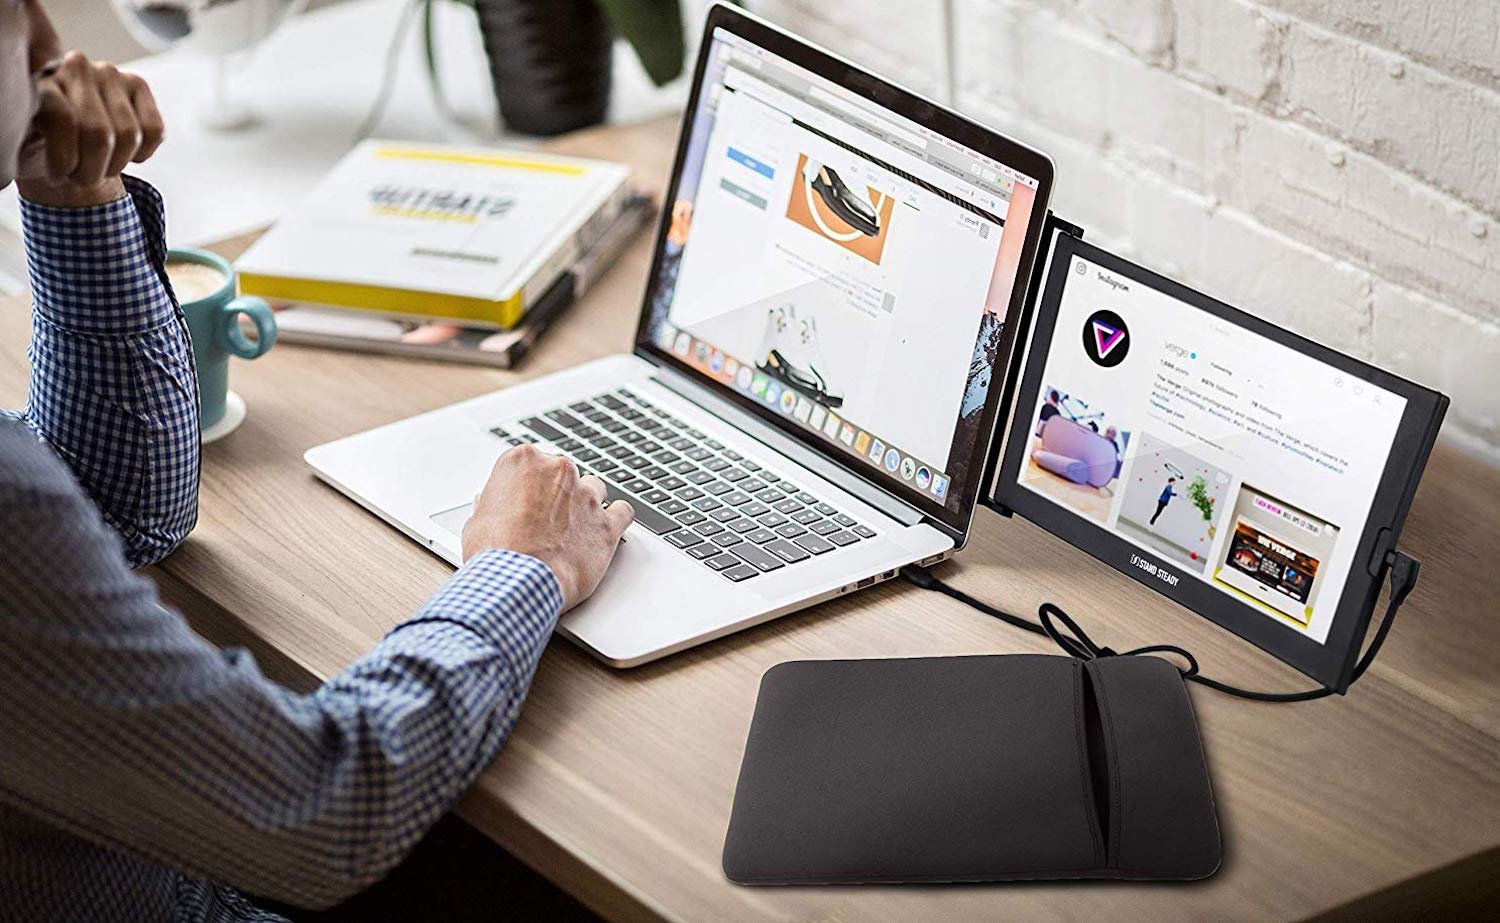 SideTrak Slide USB Screen Portable Dual Monitor makes you more productive on the go